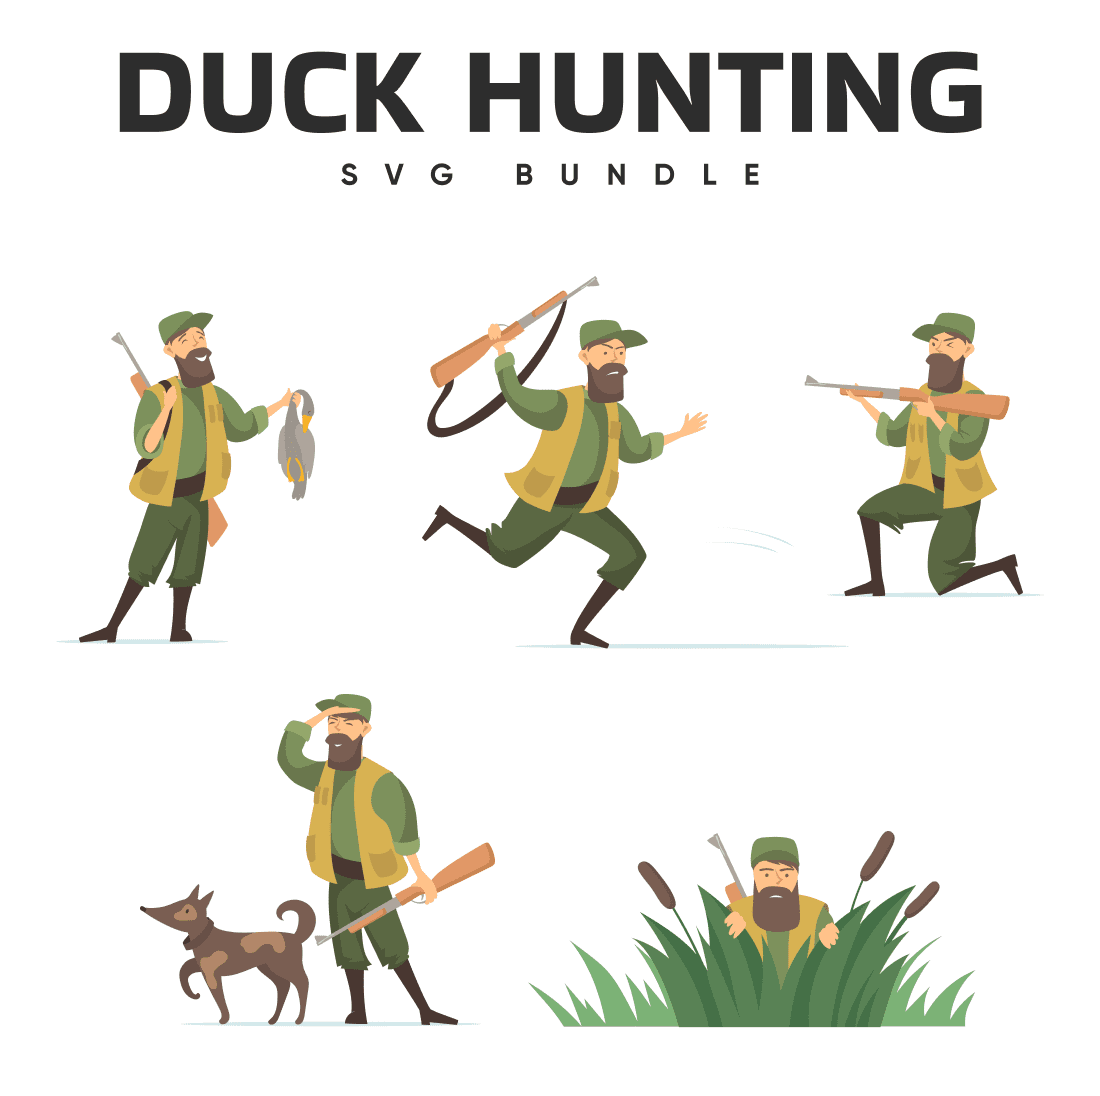 Pack of cartoon images of a duck hunter.